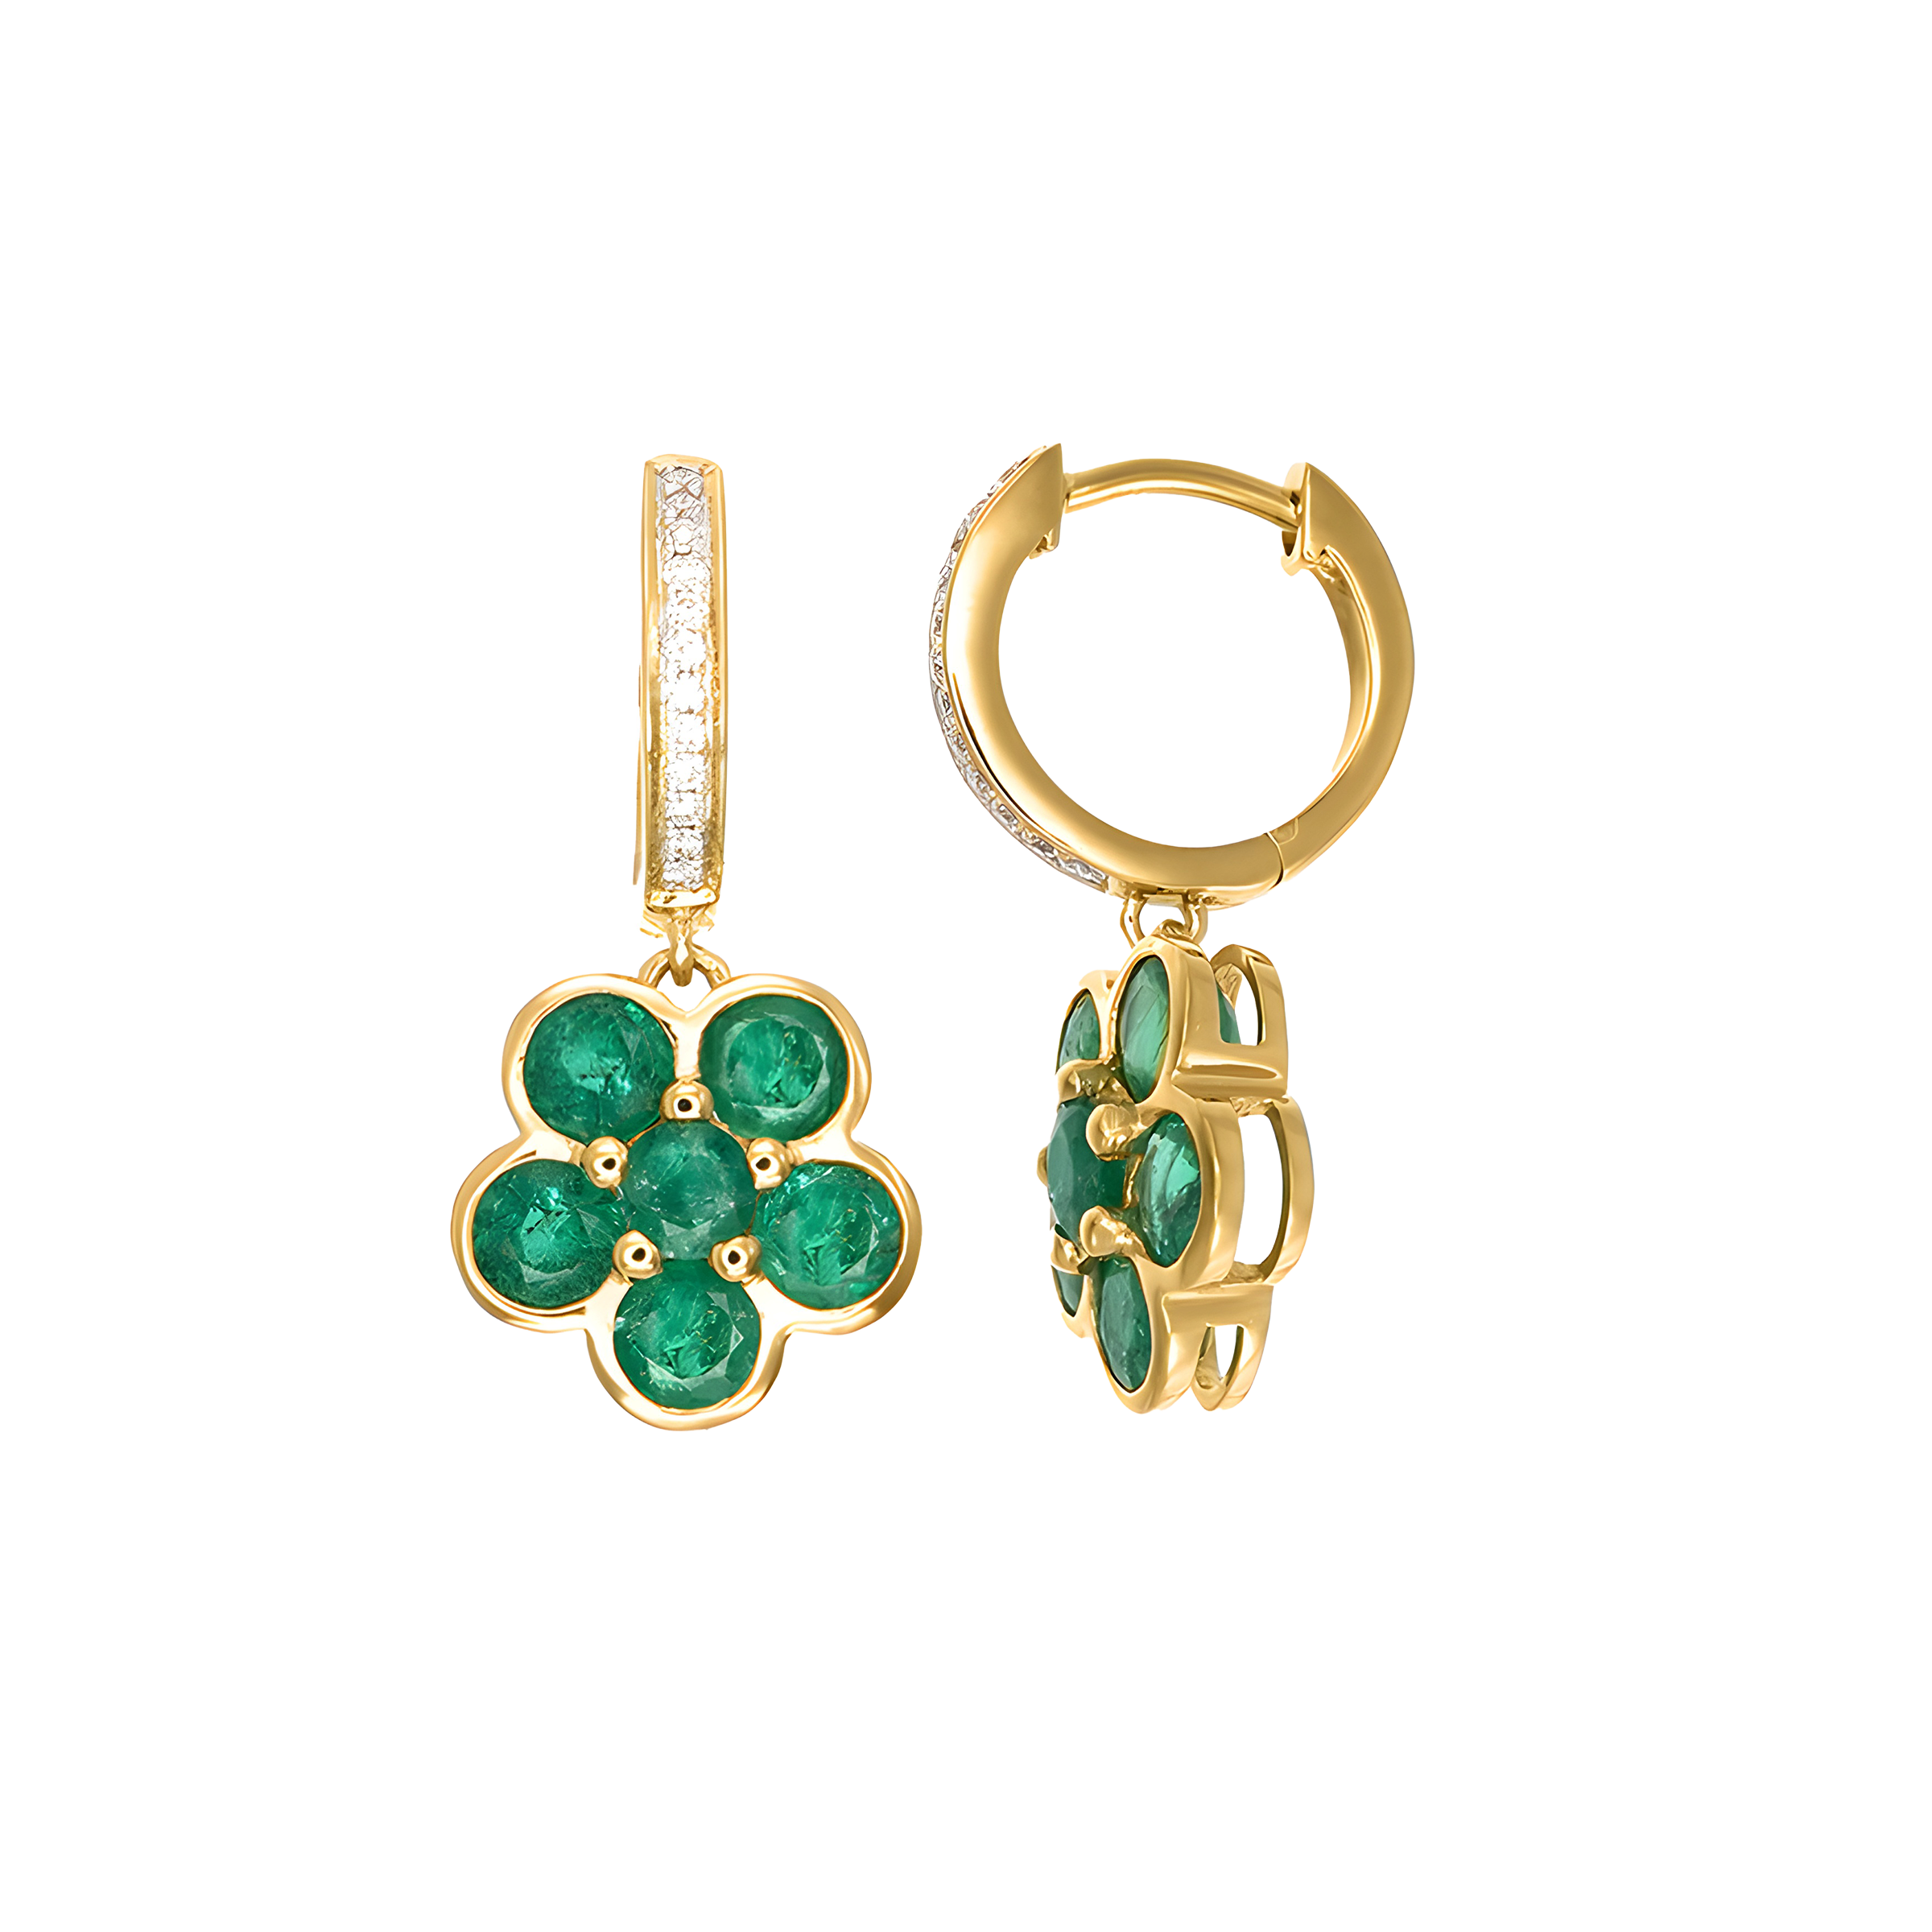 Emerald and Diamond Floral Cluster Drop Earrings in 18k Yellow Gold